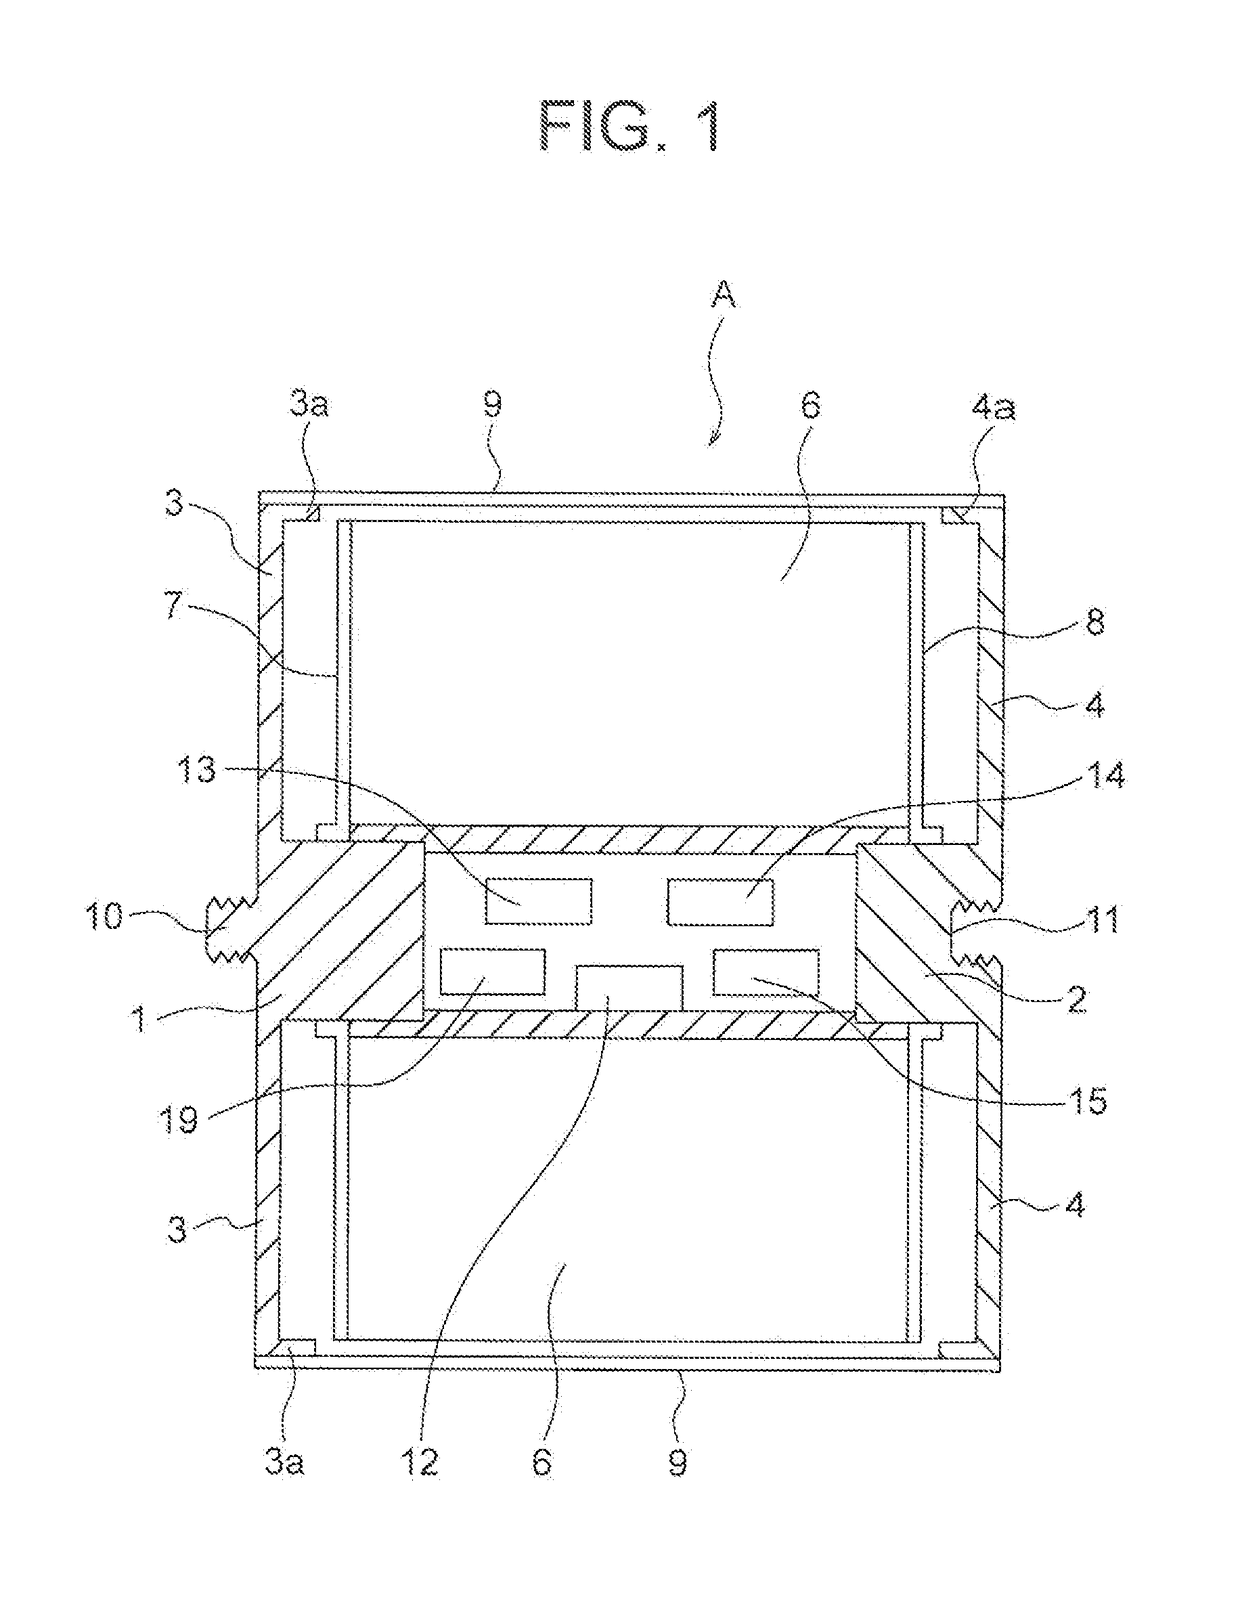 Non-aqueous electrolyte secondary battery cell and assembled battery using same